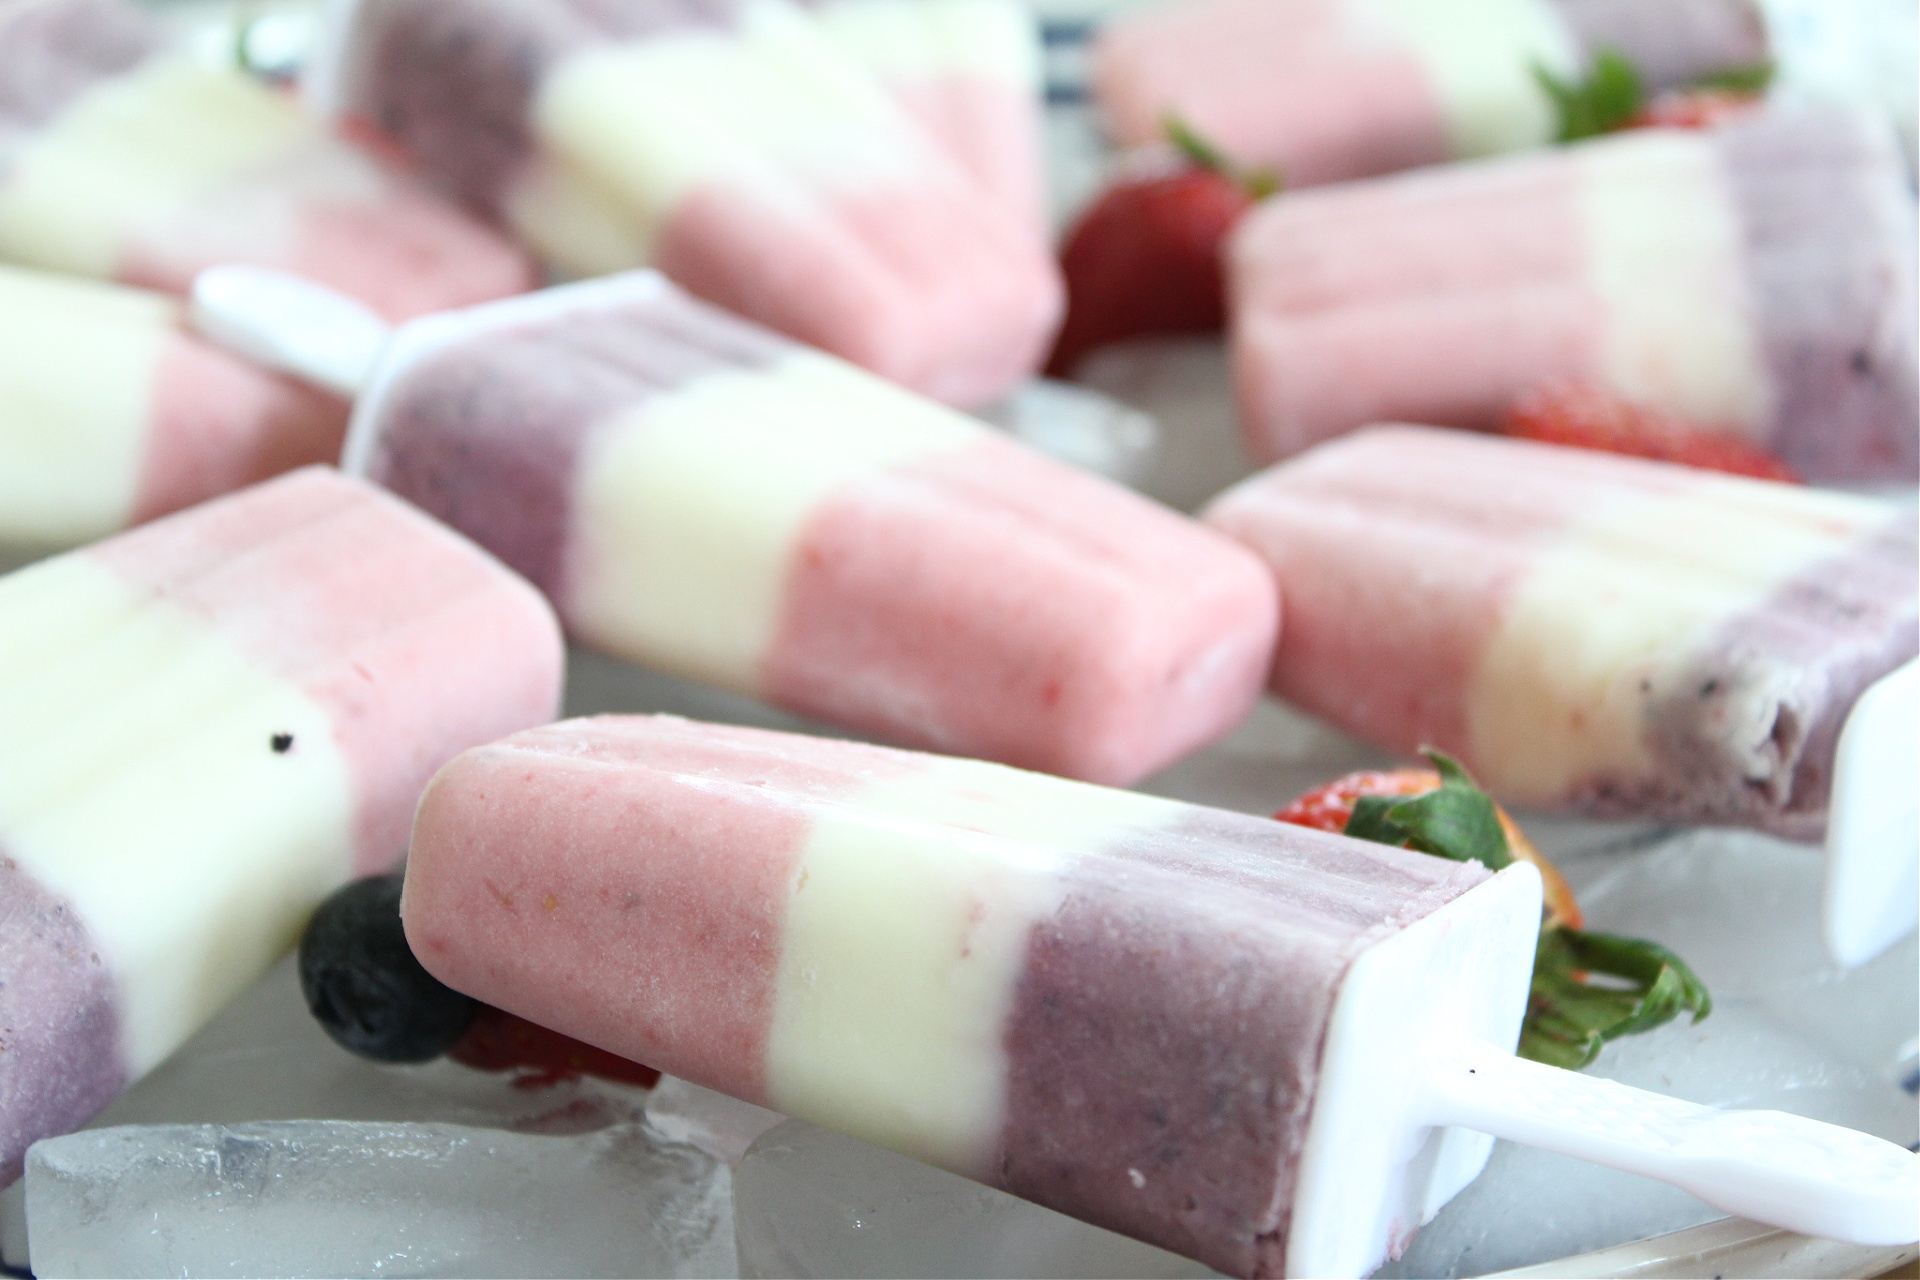 Best Red White and Blue Popsicles made with yogurt